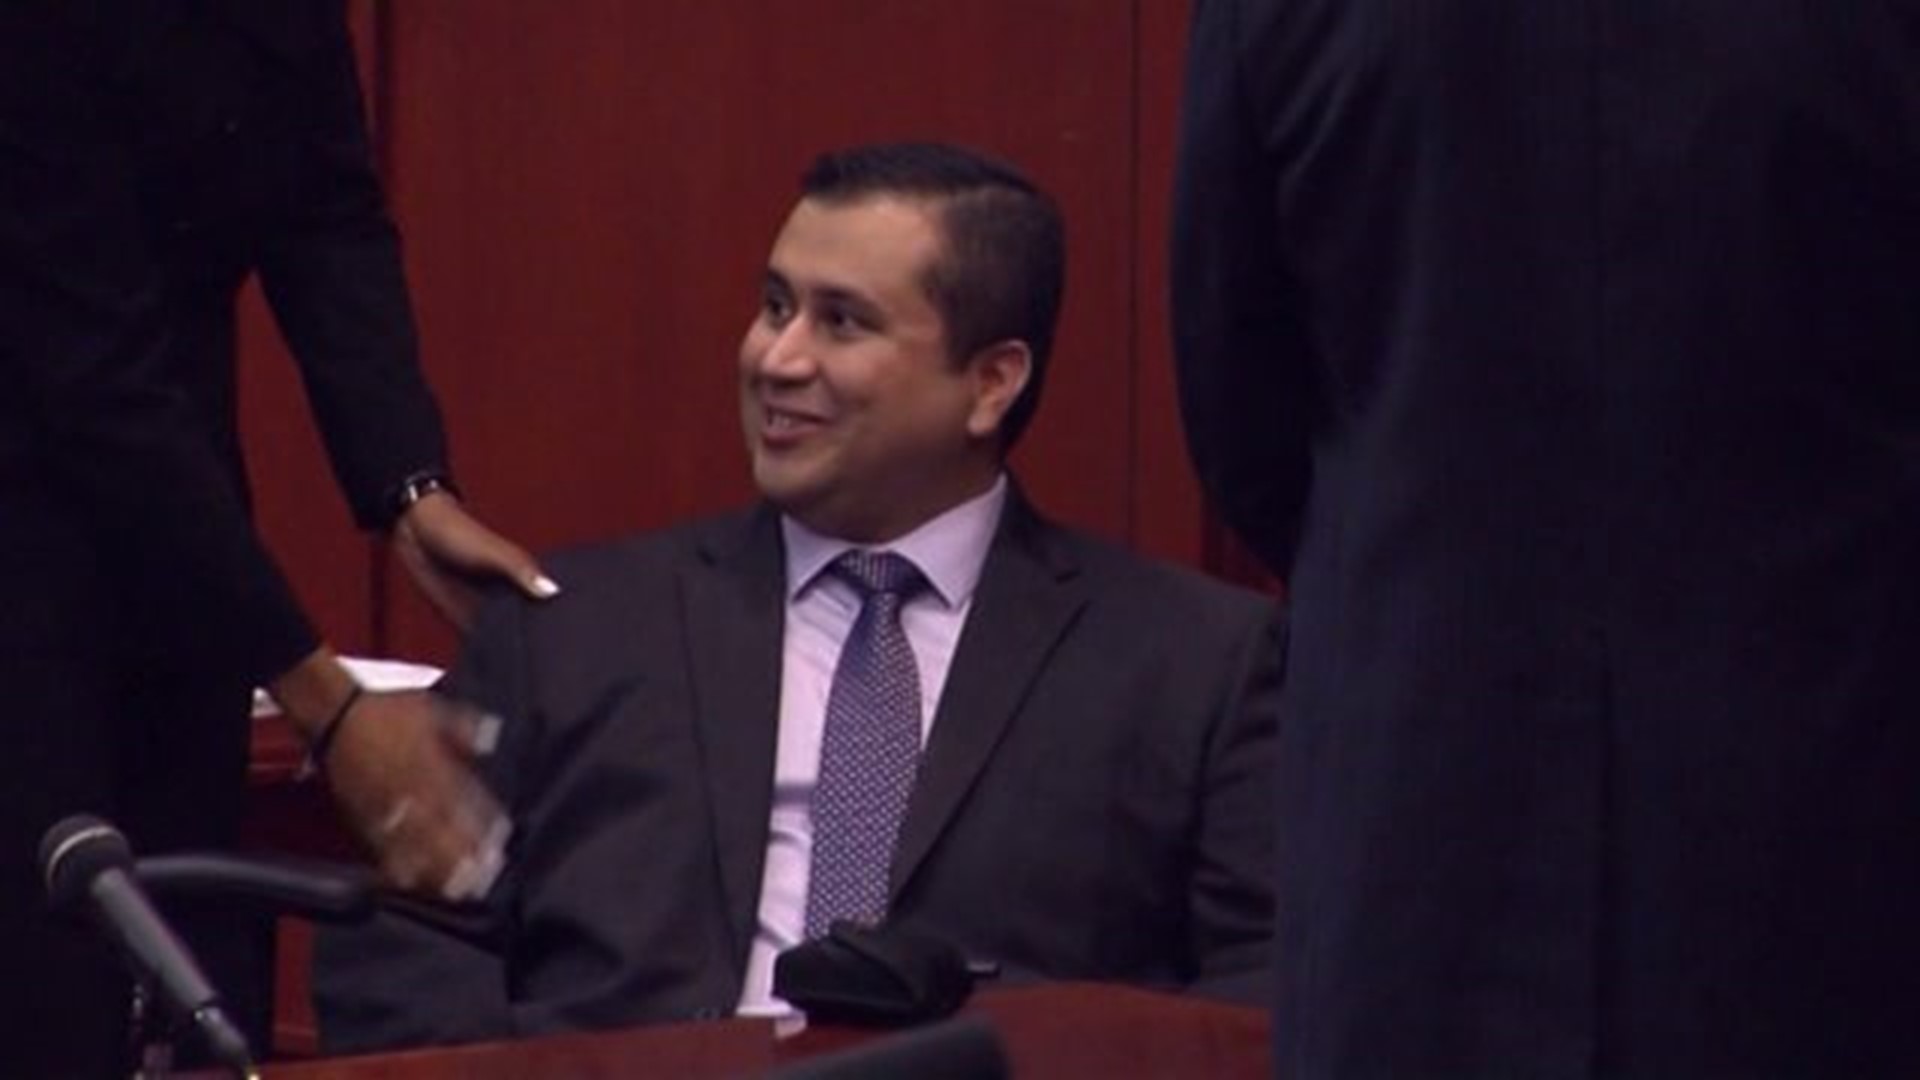 Advocates for social justice react to Zimmerman`s plan to sell gun used to kill Trayvon Martin